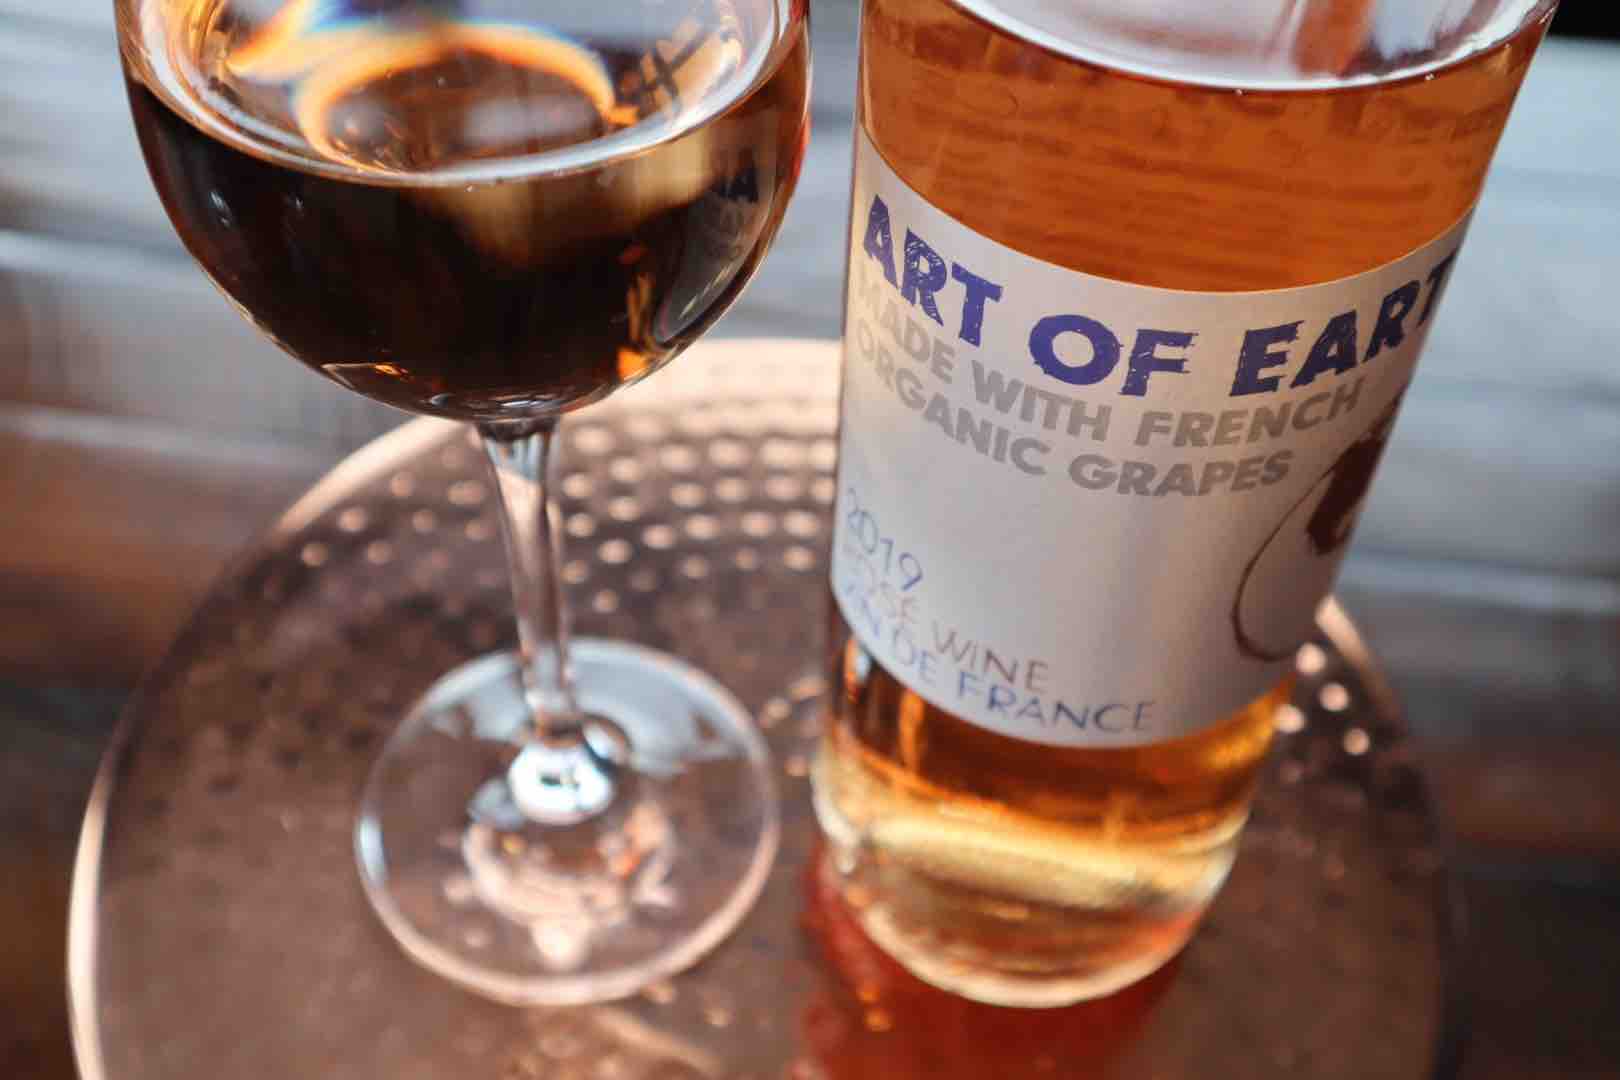 Art of Earth Rosé Wine Is The Best Rosé Wines for Picnic Season